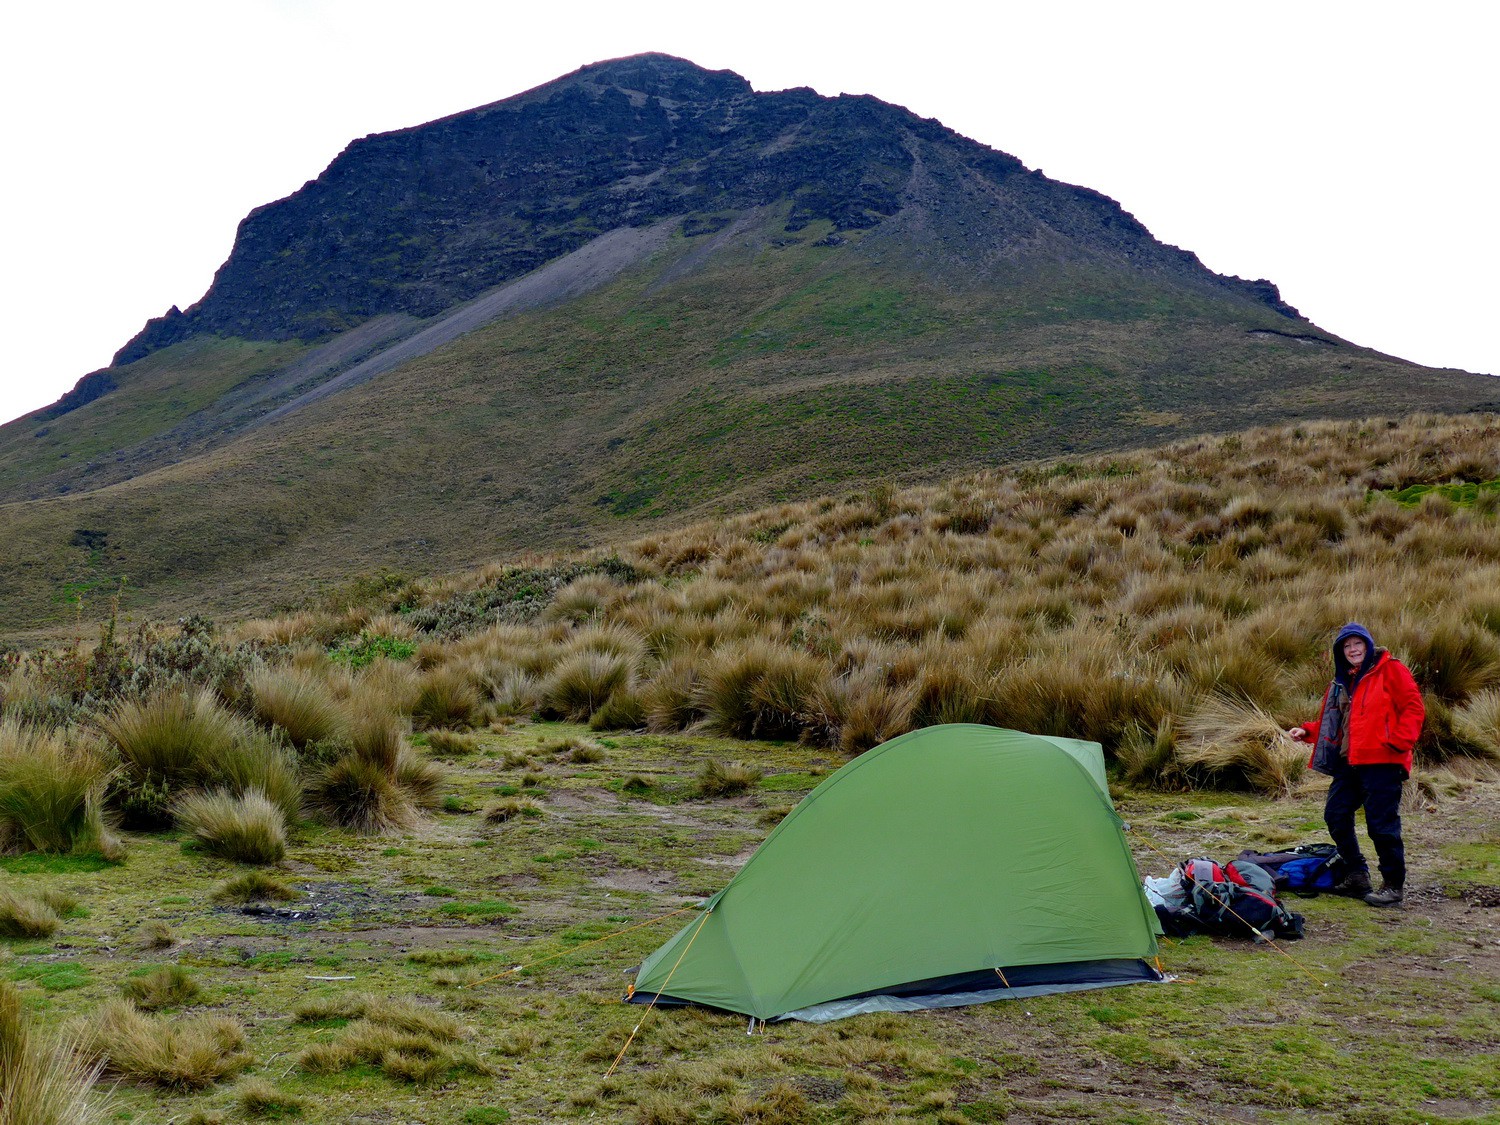 Our basecamp with 4790 meters high Corazon